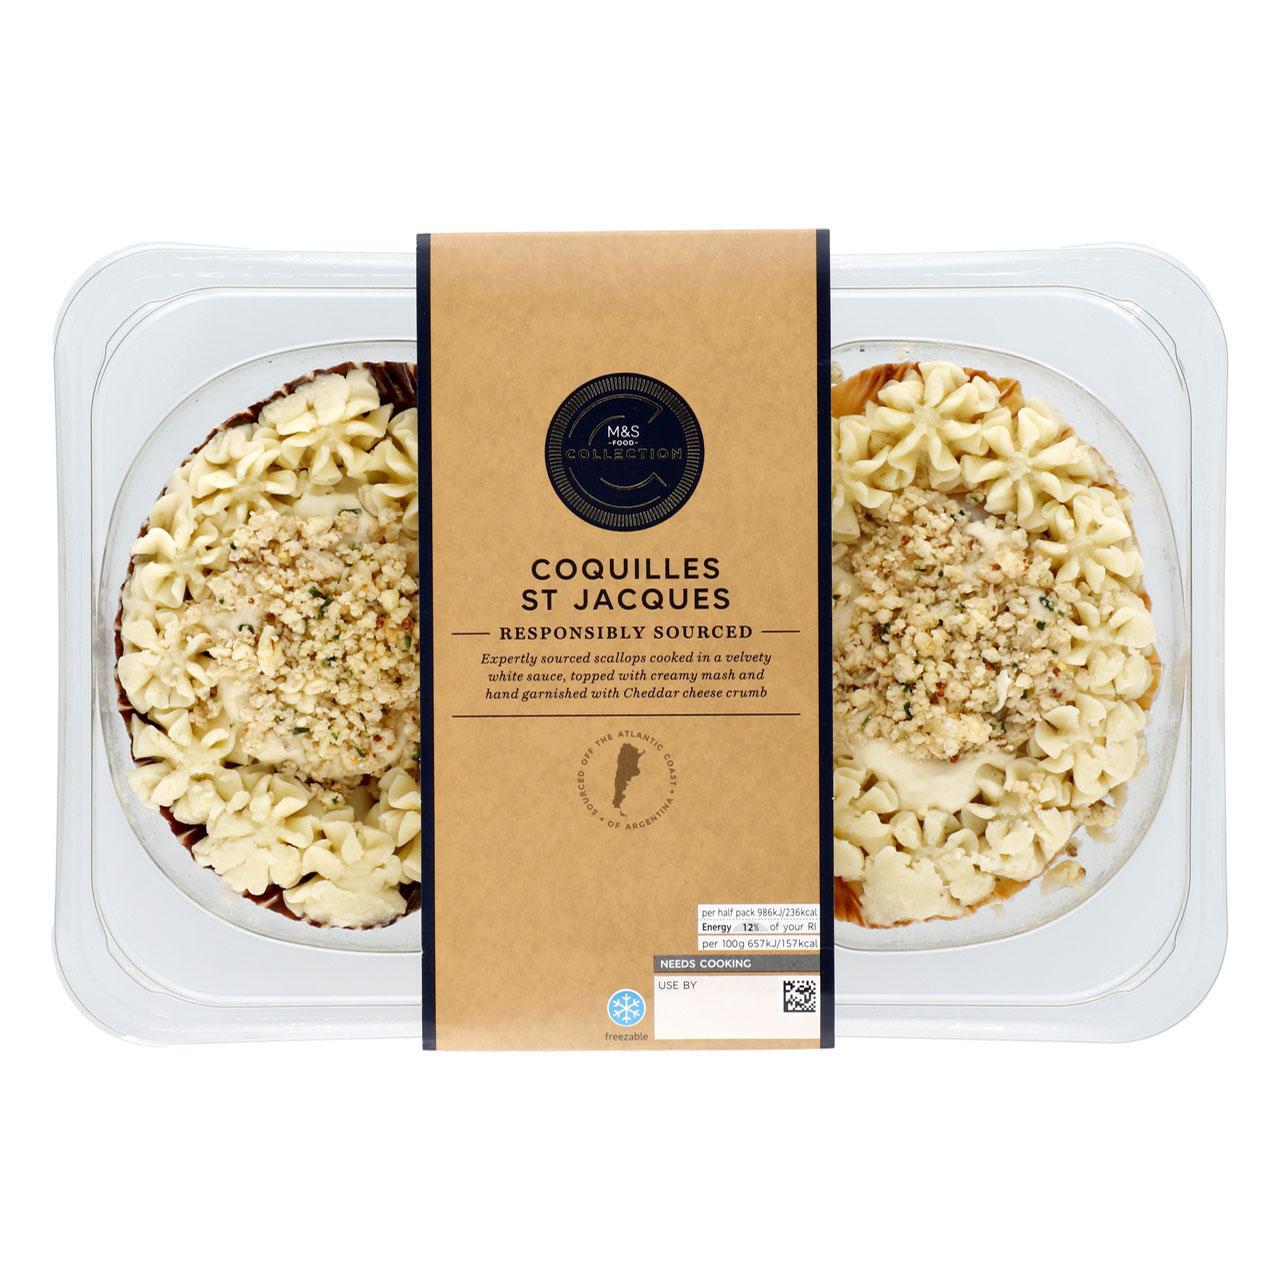 M&S Collection 2 Coquilles St Jacques 300g